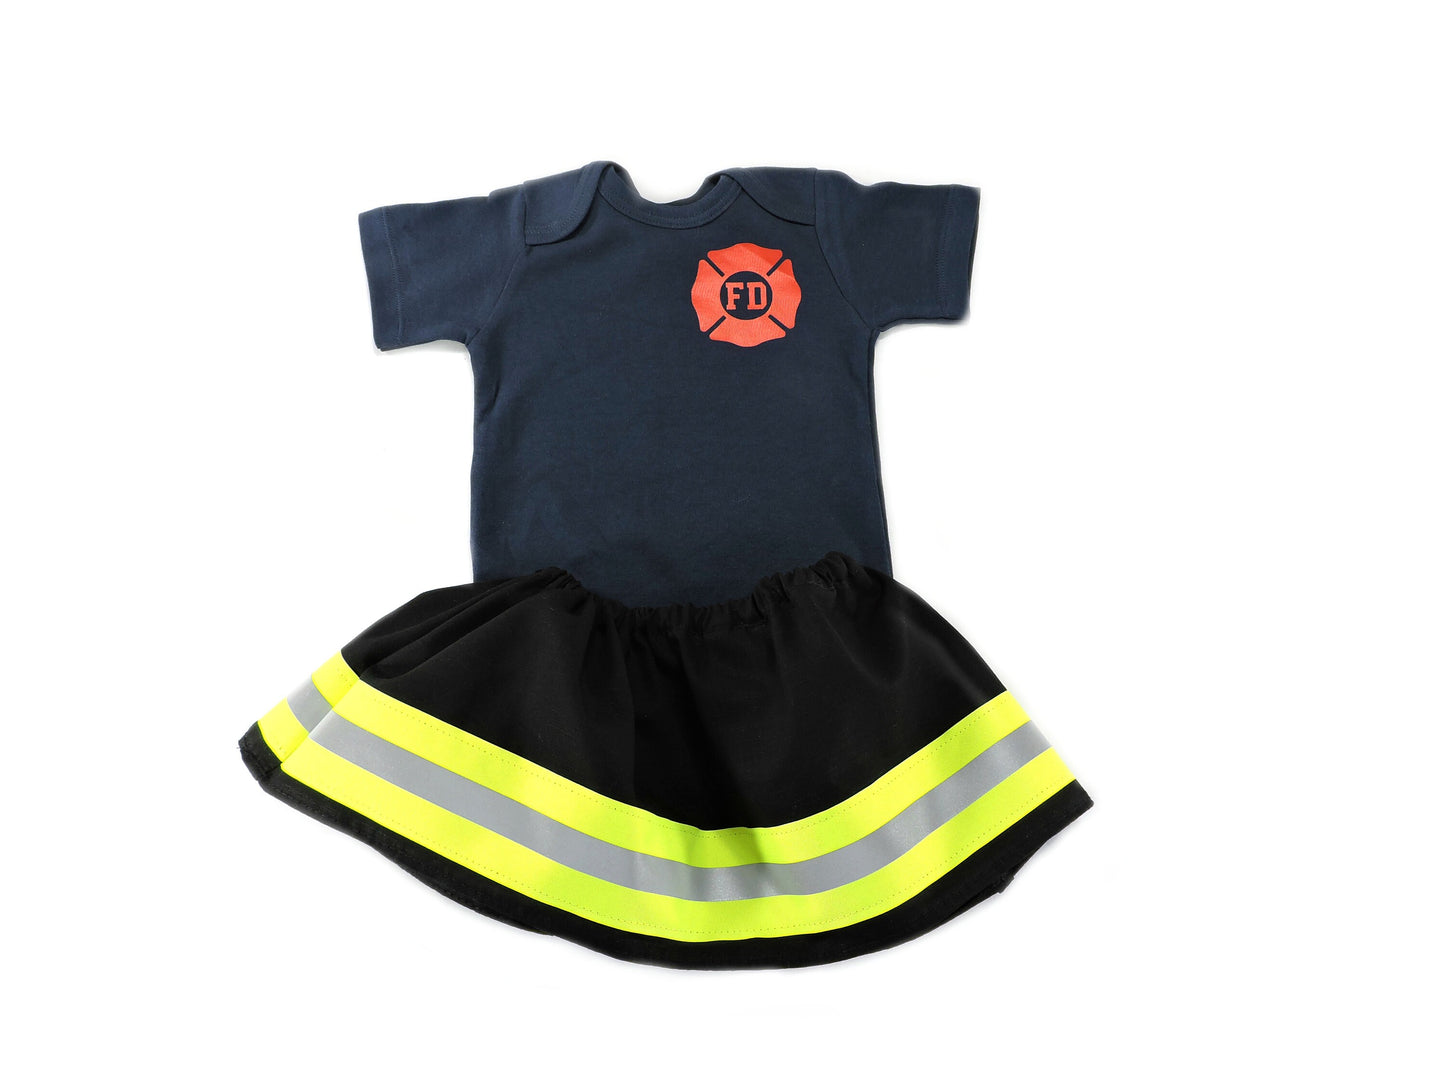 black fabric baby girl firefighter outfit